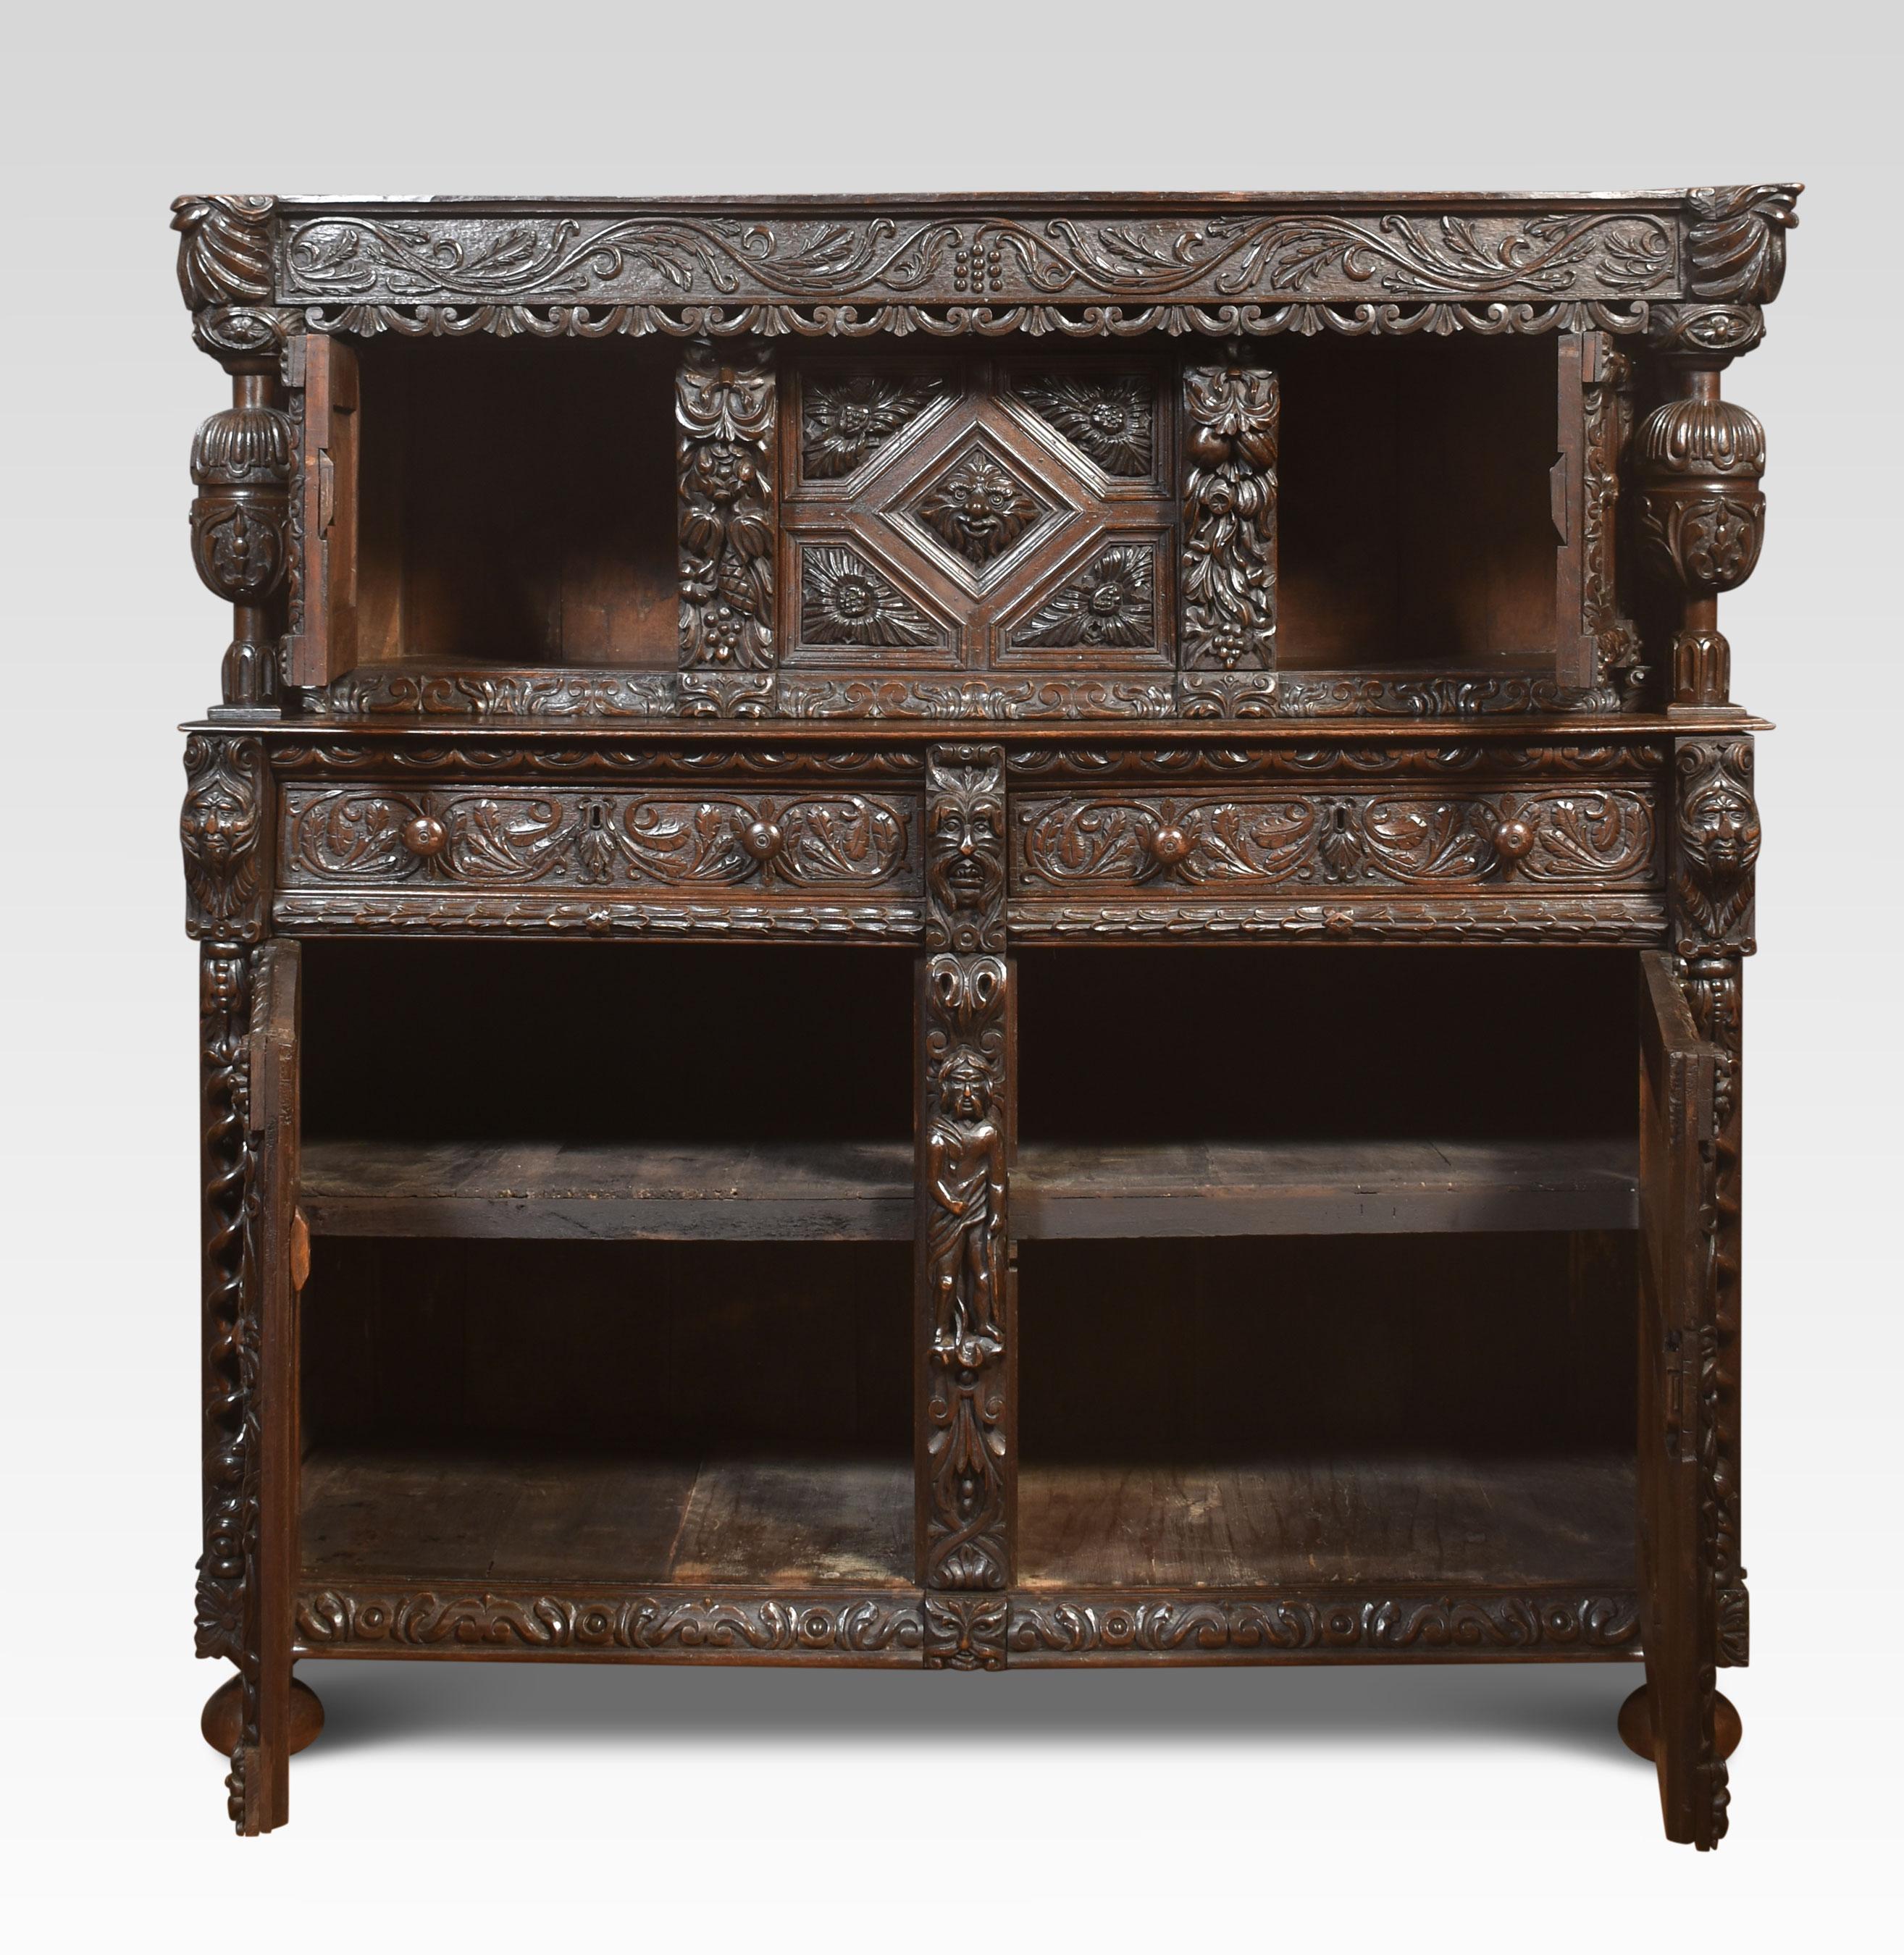 Fine old oak Profusely Carved court cupboard in Elizabethan manor, the frieze with scrolling decoration, with leaf motifs above two panelled doors with decorated panels. Flanked by a pair of cup and cover supports. To the base section with three